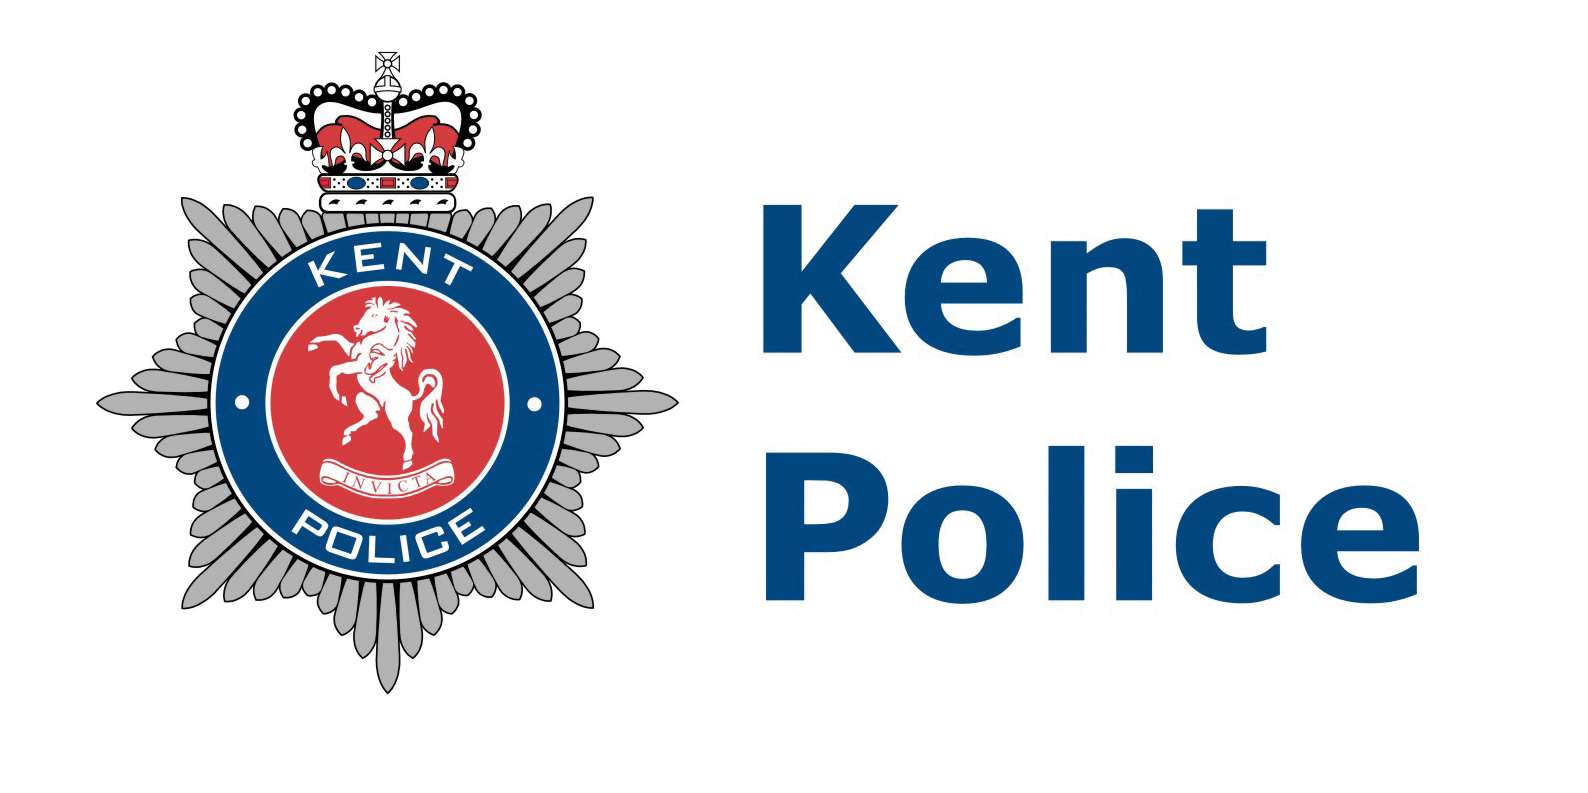 Police are investigating the theft of wild birds in Kent.